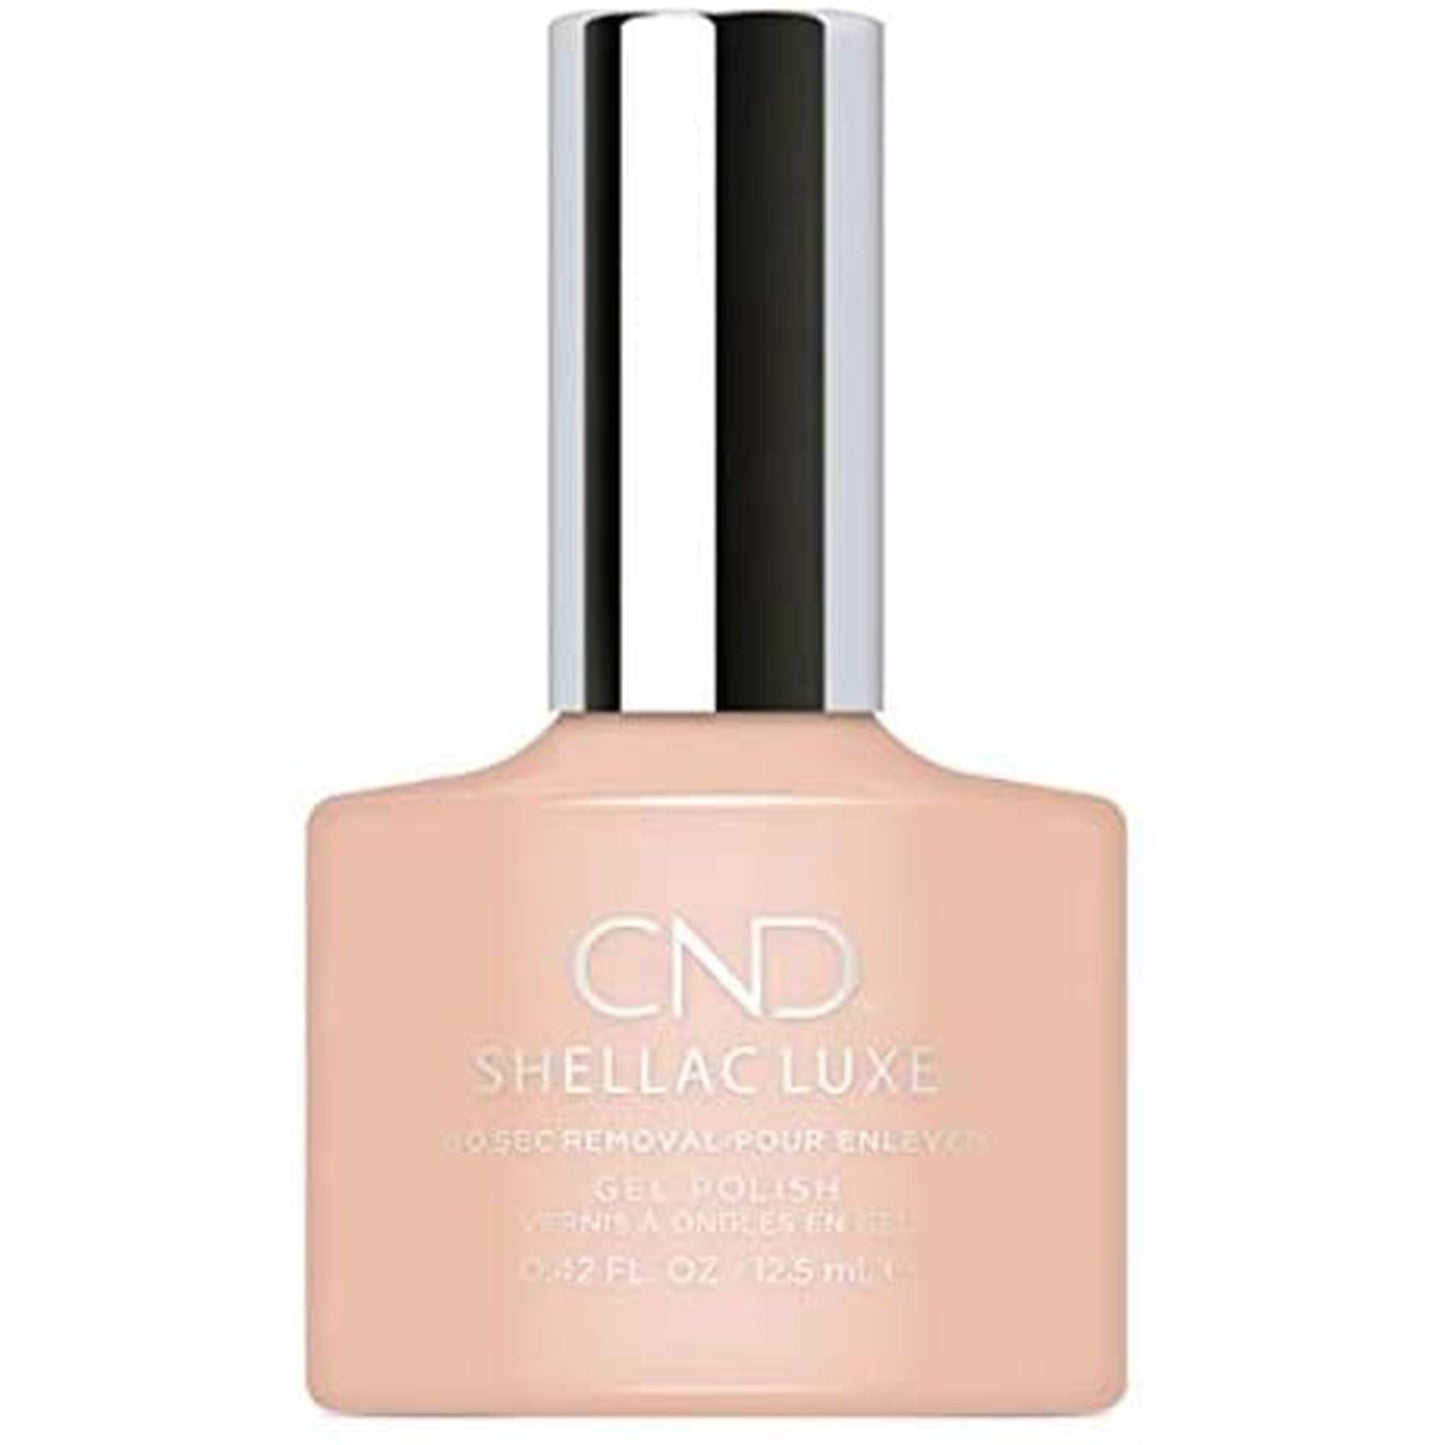 CND Shellac Luxe Gel Polish Antique # 311-CND-BeautyNmakeup.co.uk